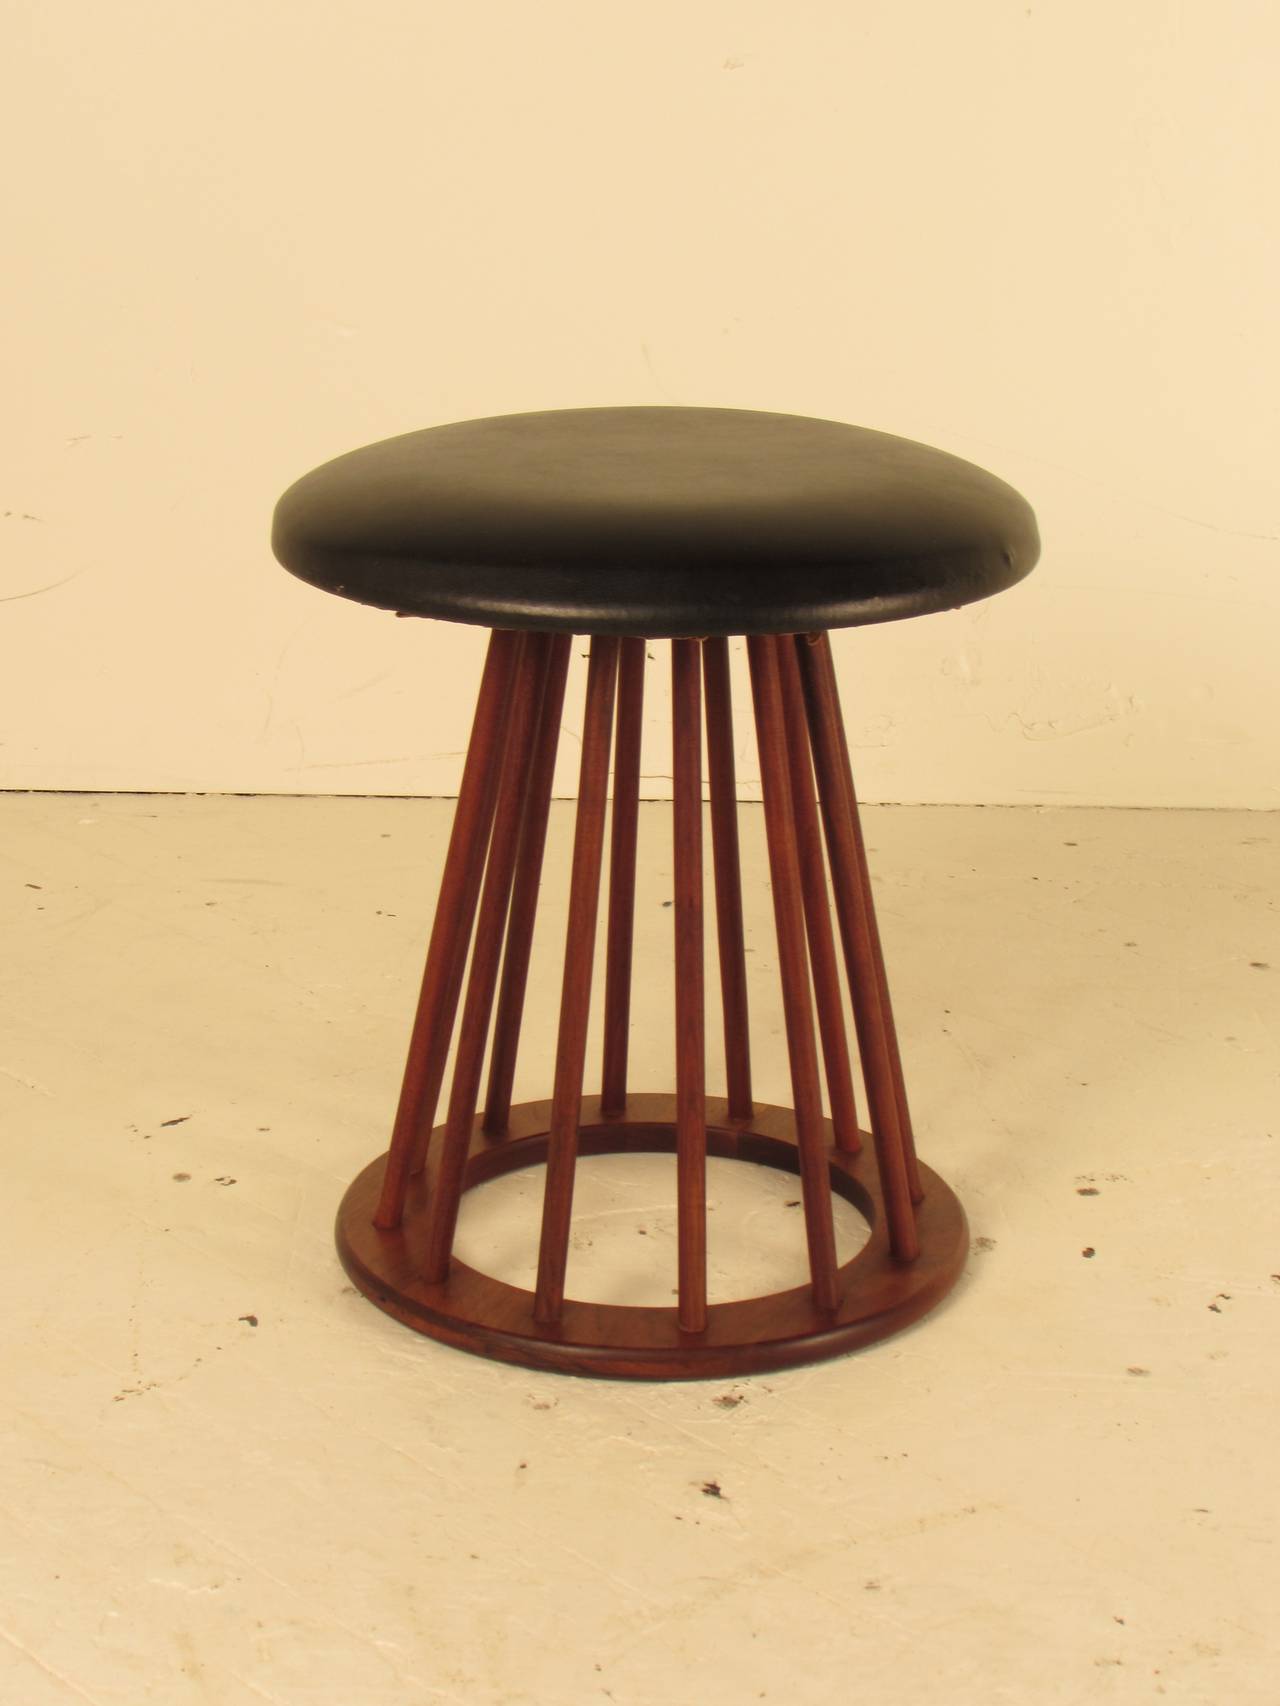 Danish Modern Teak Spindle Stool by Arthur Umanoff for Washington Wood Products. The seat is original and in excellent condition. Frame is made of multiple teak spokes which create an open framework that is both simple and elegant. 

Condition: